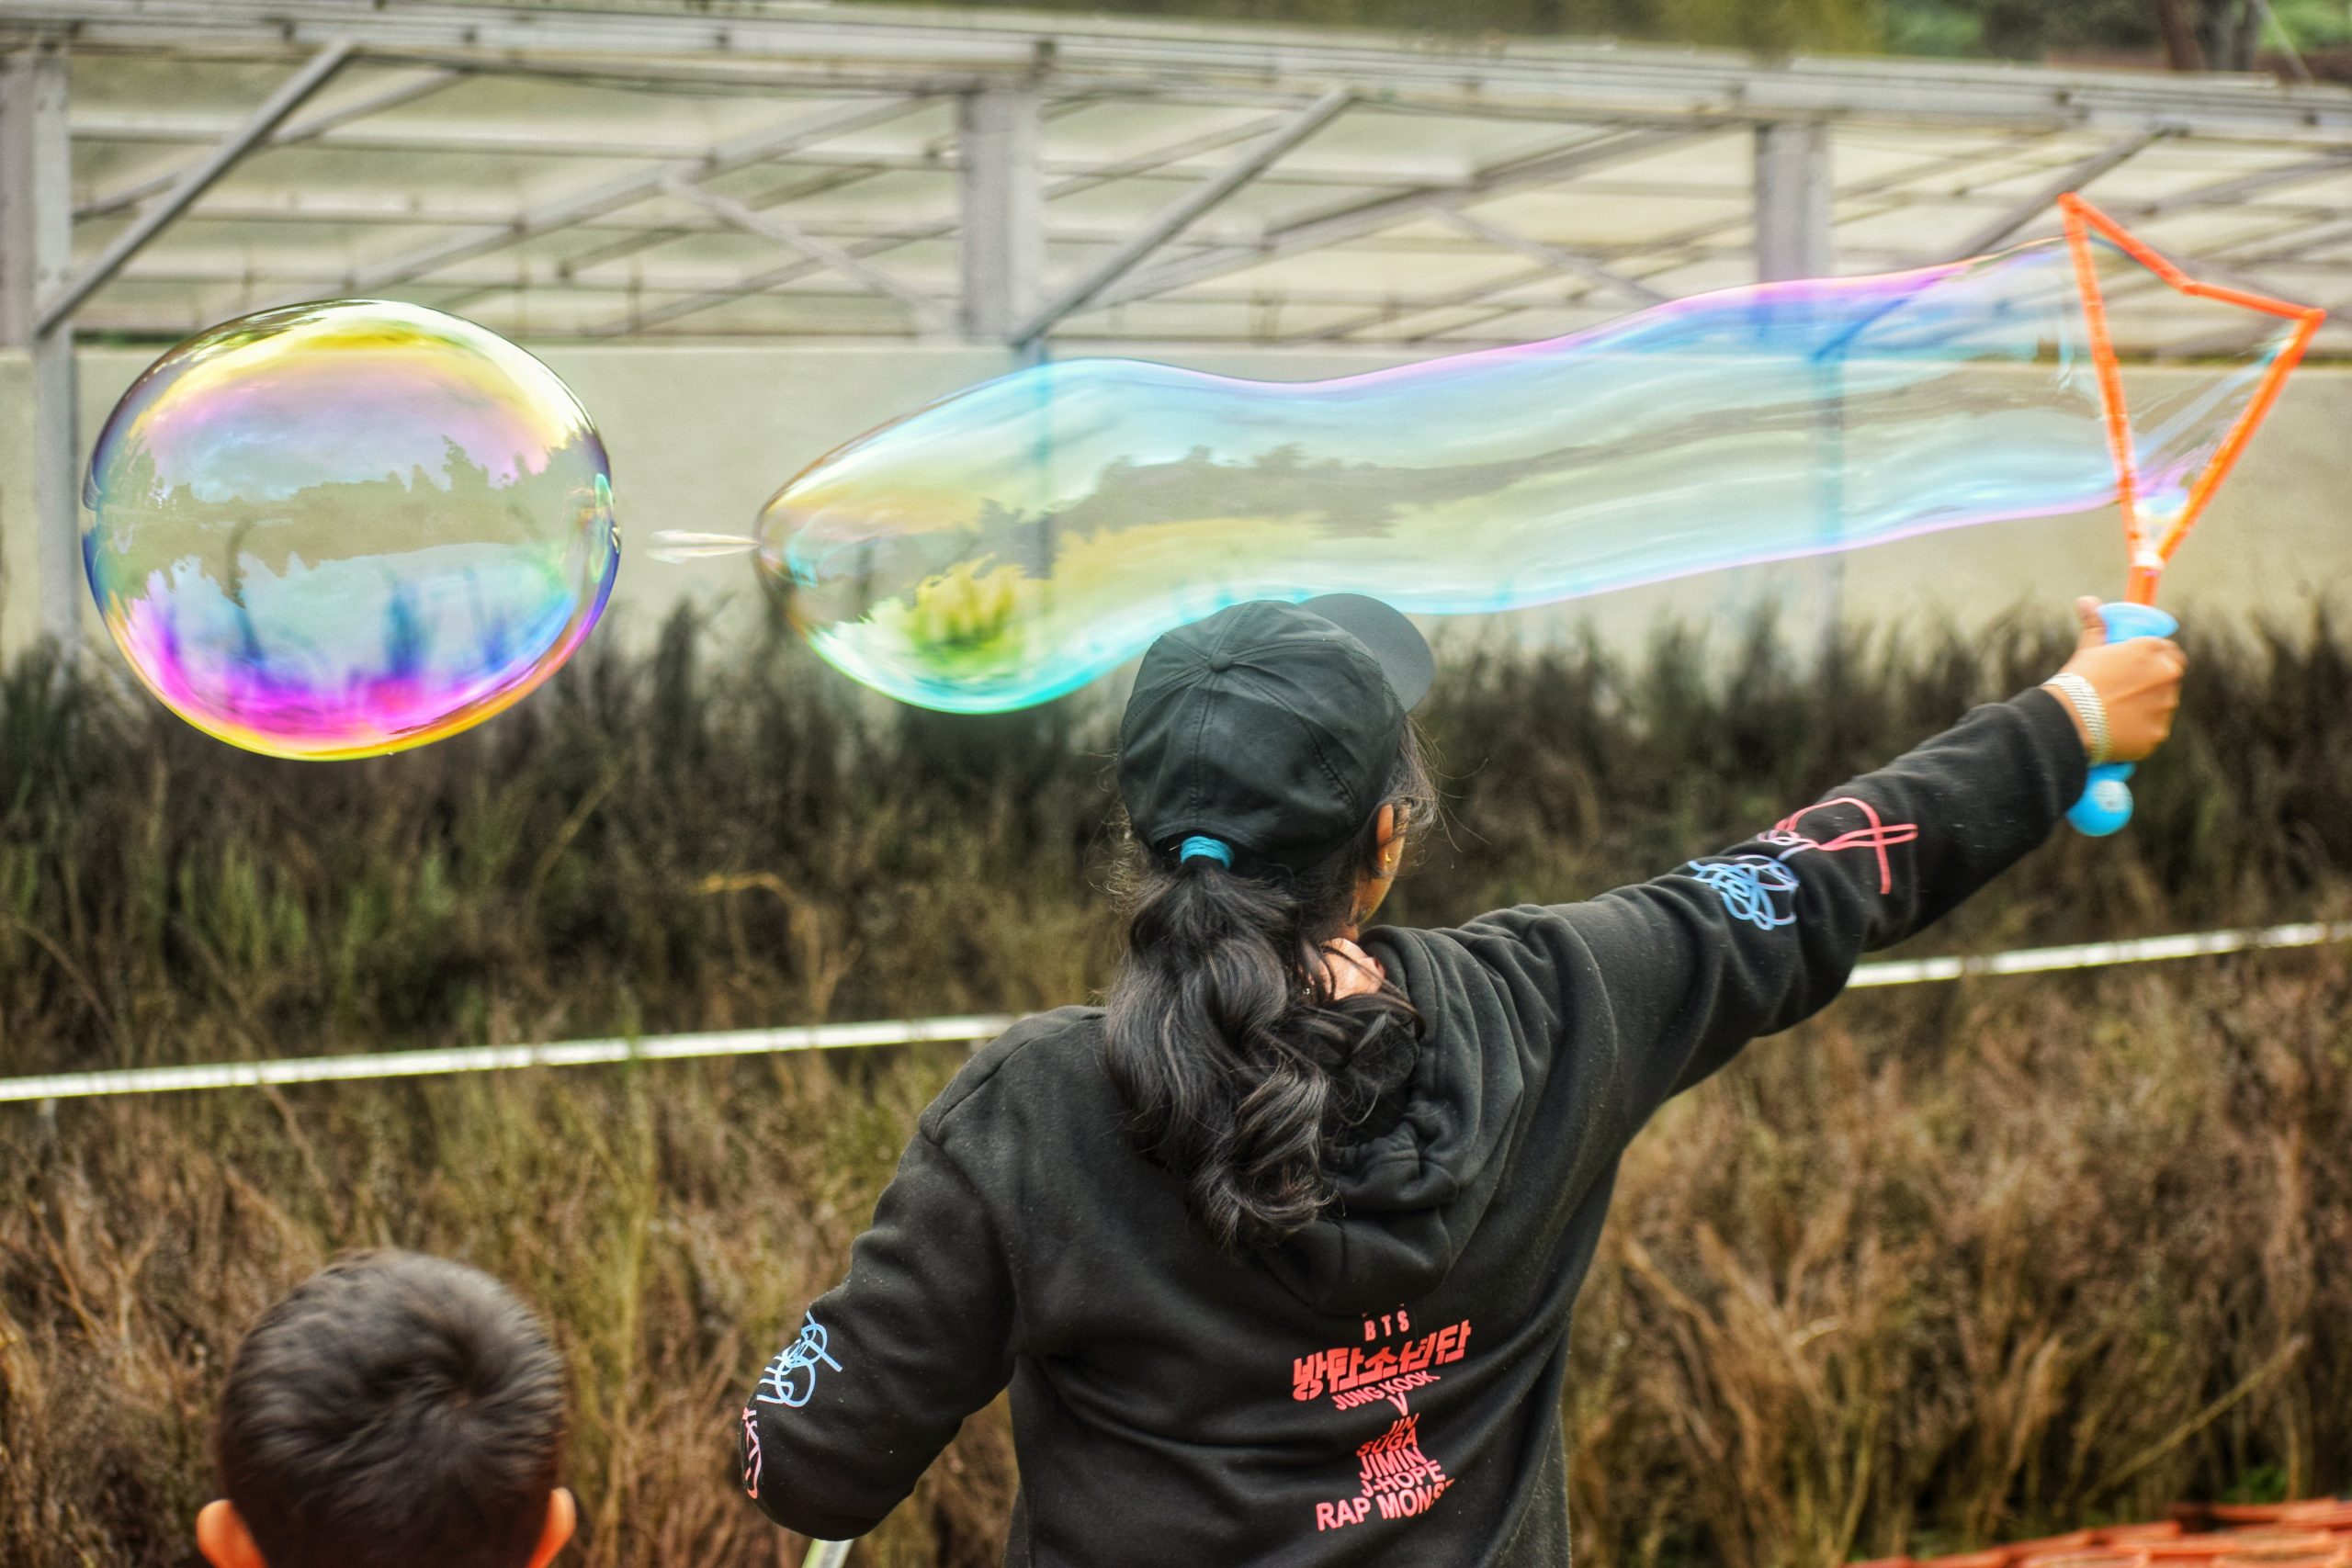 Making bubbles with bubble maker